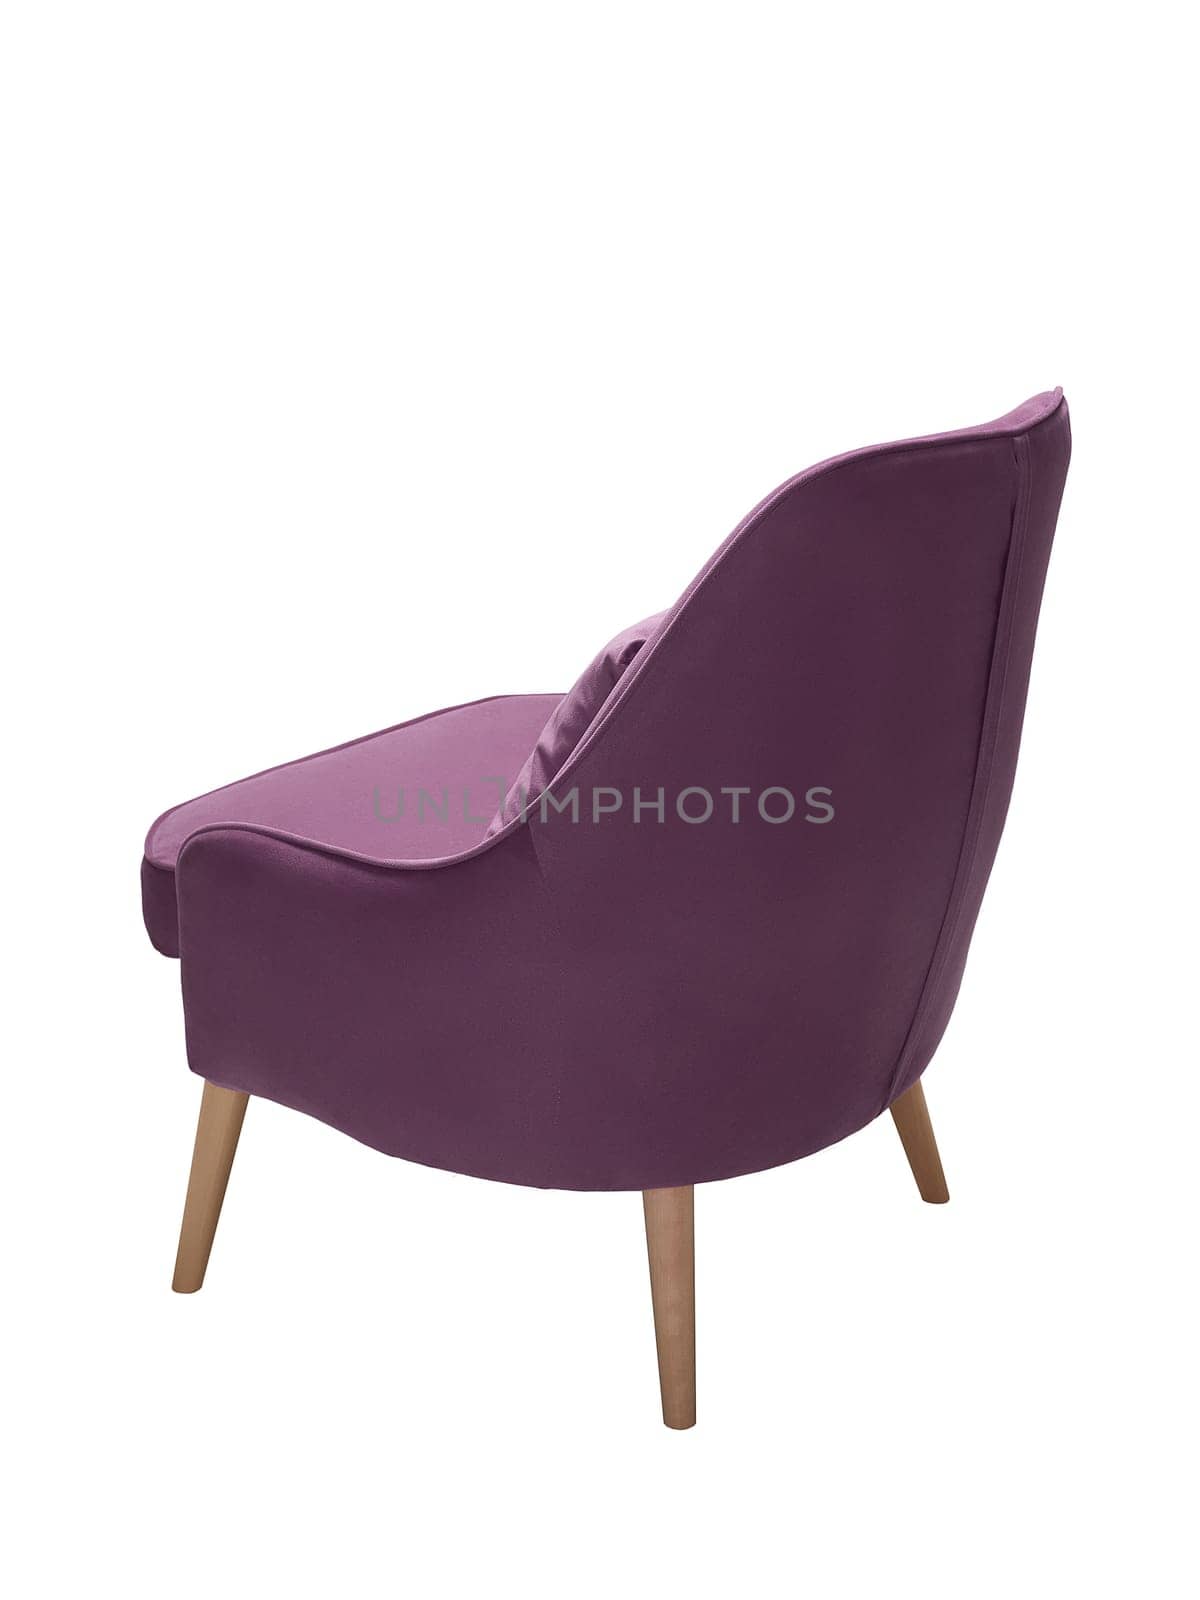 modern purple fabric armchair with wooden legs isolated on white background, back view.